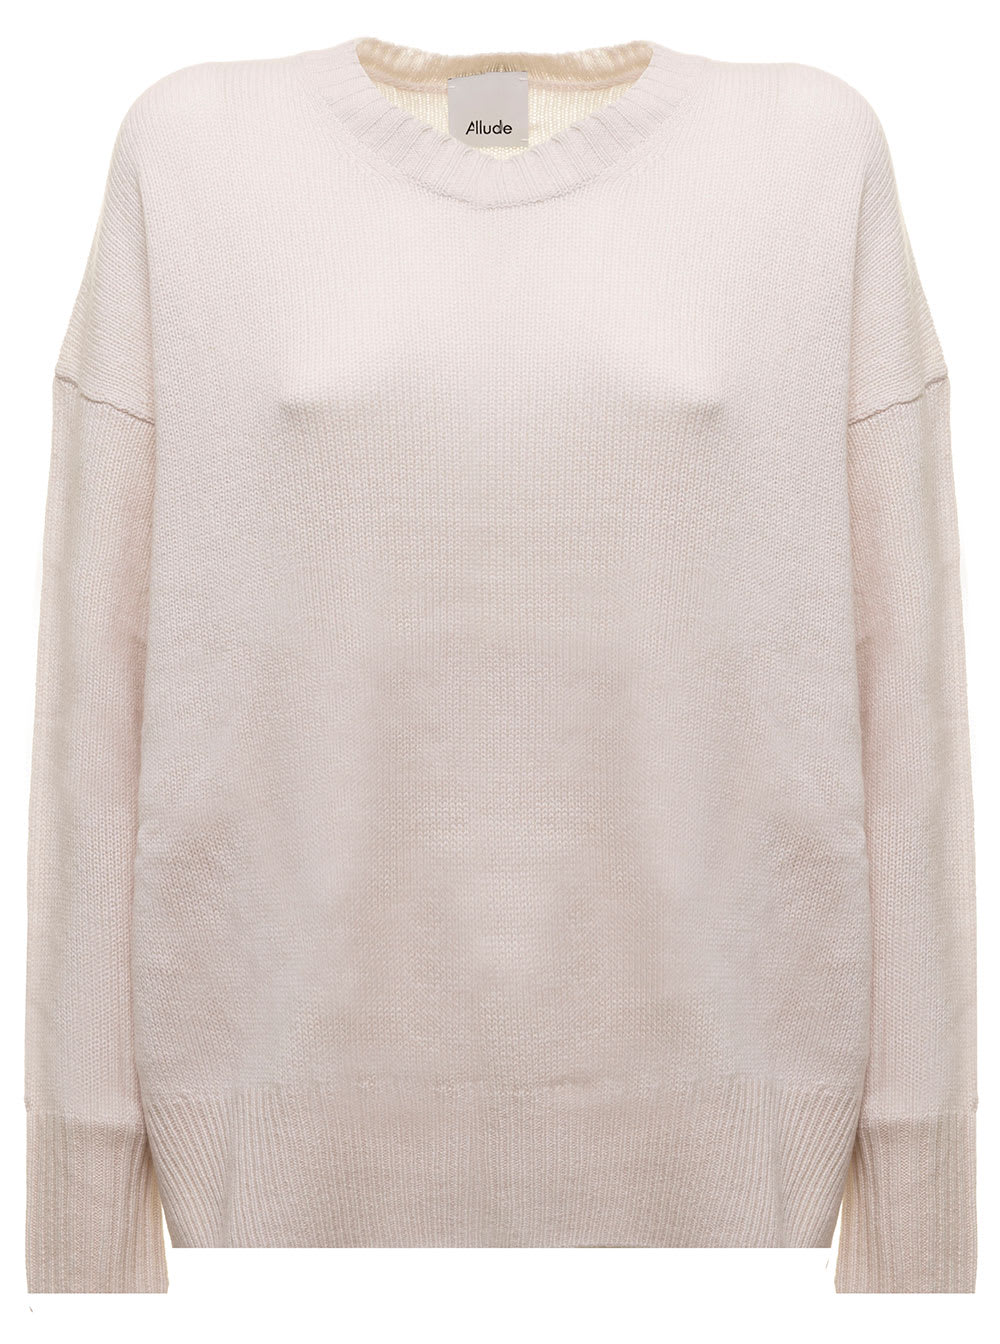 Cashmere Beige Sweater Allude Woman